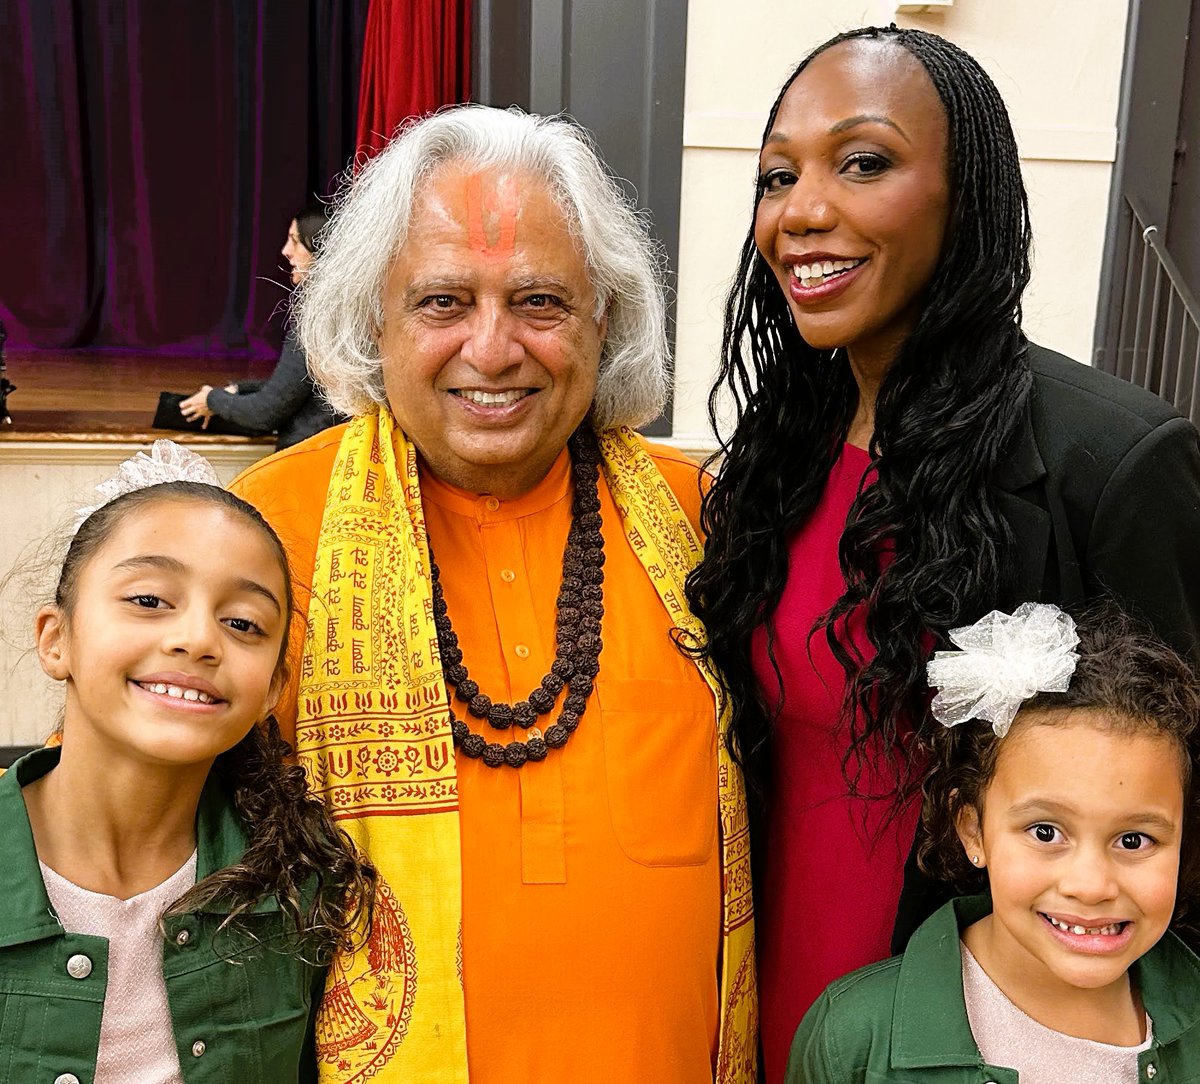 I met awards-winning Doctor Bayo Curry-Winchell (and her daughters) and had conversation with her. #DrBCW is founder of #BeyondClinicalWalls, a #TEDx Speaker, Member of Nevada’s Medical Advisory Team, etc.
@DR_BCW